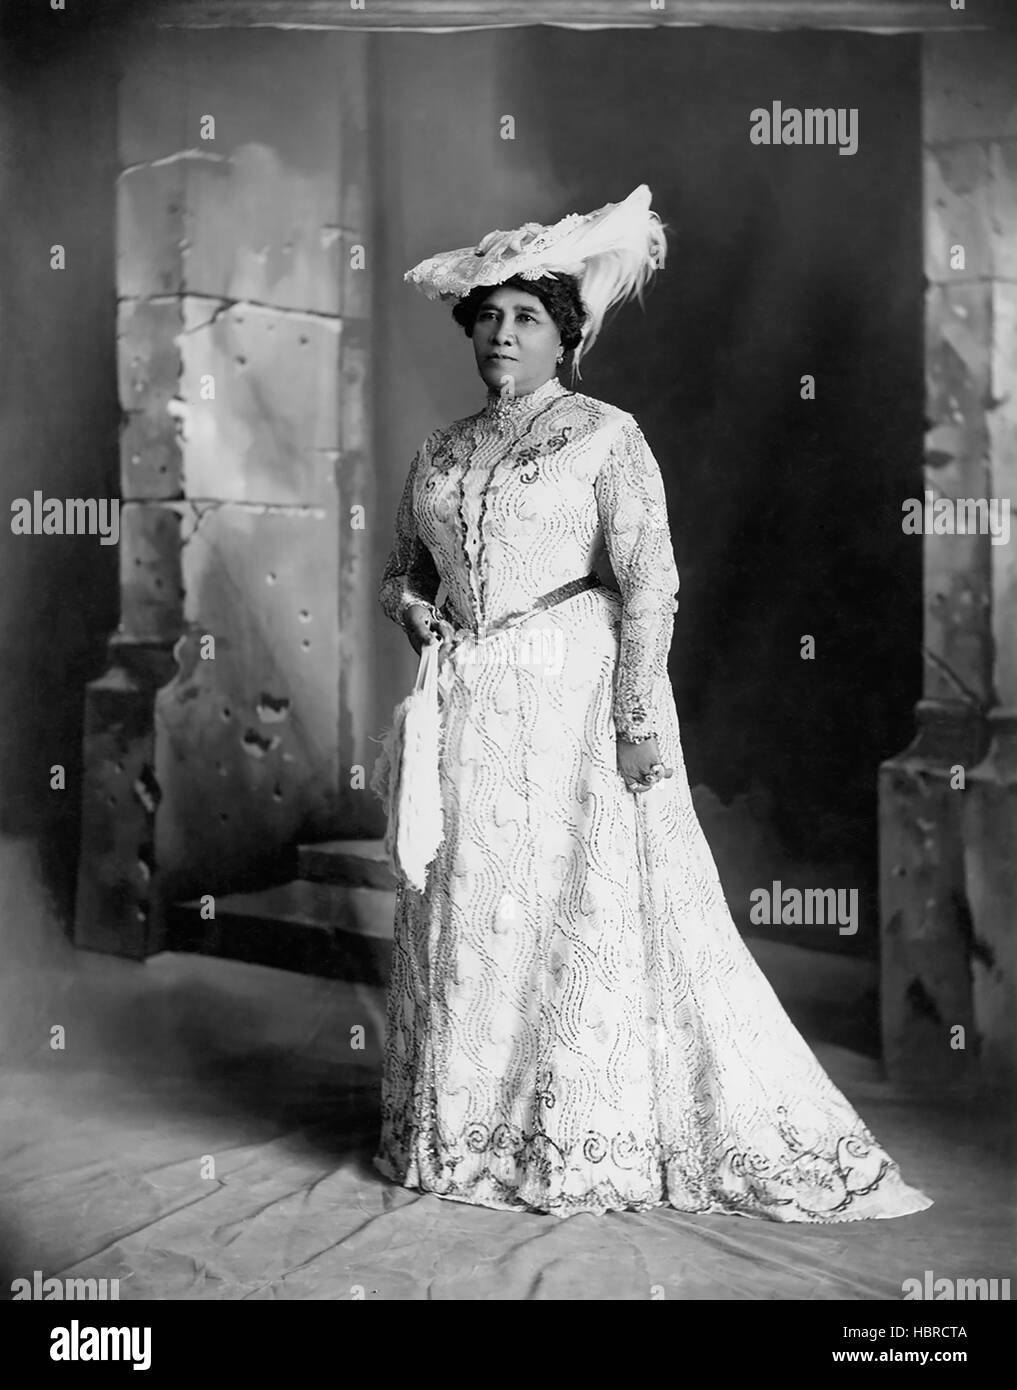 Queen Liliuokalani (1838-1917) was the Kingdom of Hawaii's first queen and final sovereign ruler.  She reigned from 1891 until 1893 when the monarchy was overthrown. (Photo by Davey) Stock Photo